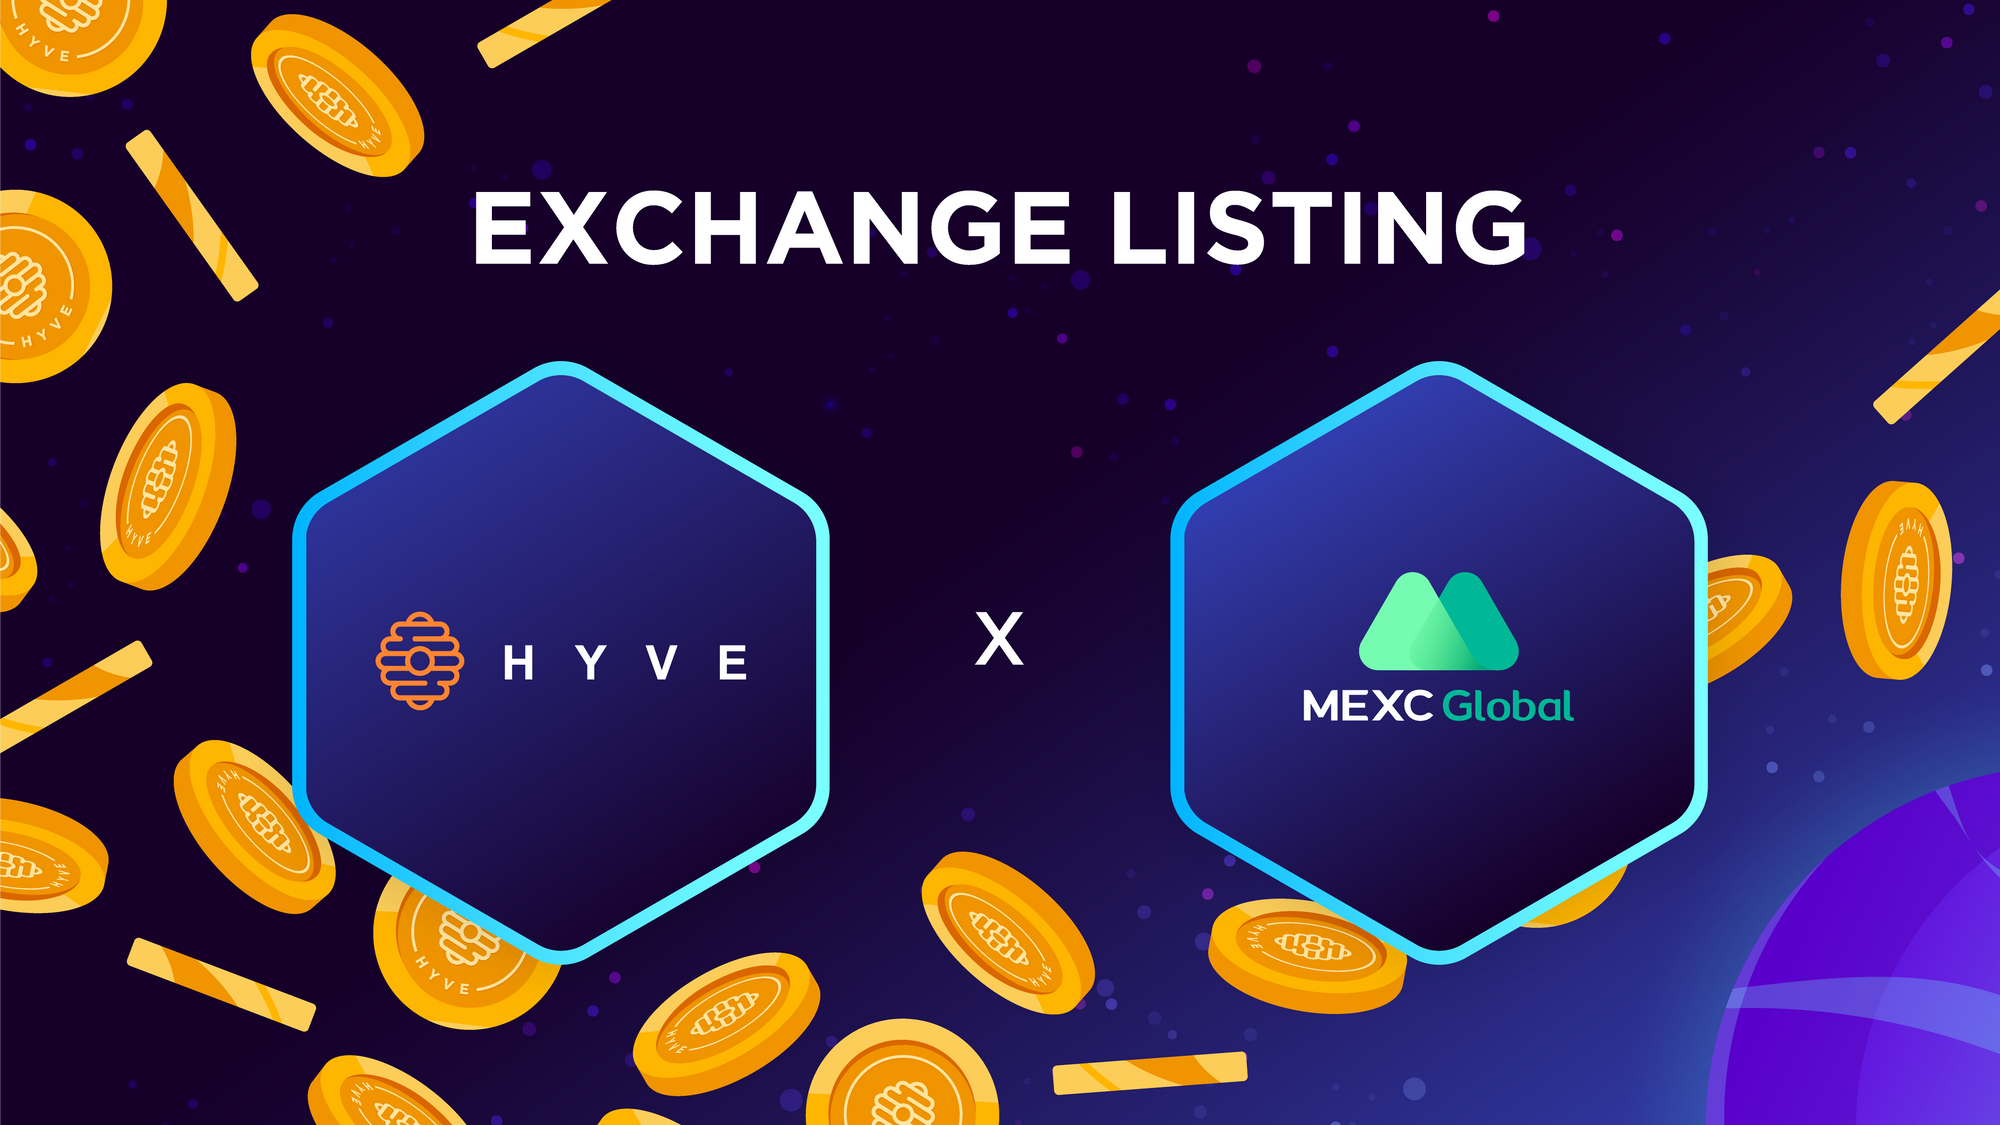 HYVE is getting listed on MEXC